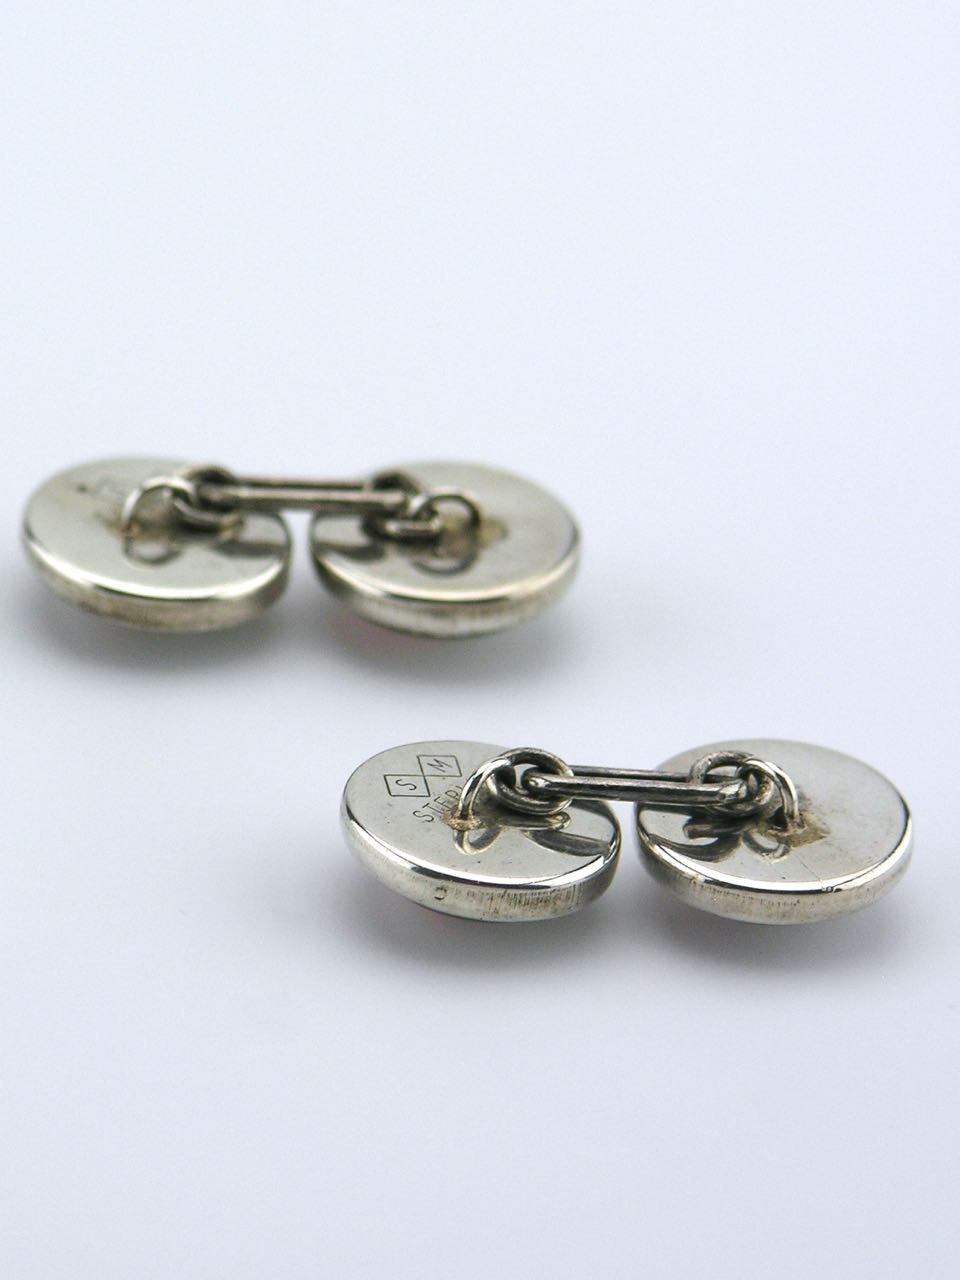 Vintage American Silver Mounted Double Fronted Essex Crystal Golfer Cufflinks